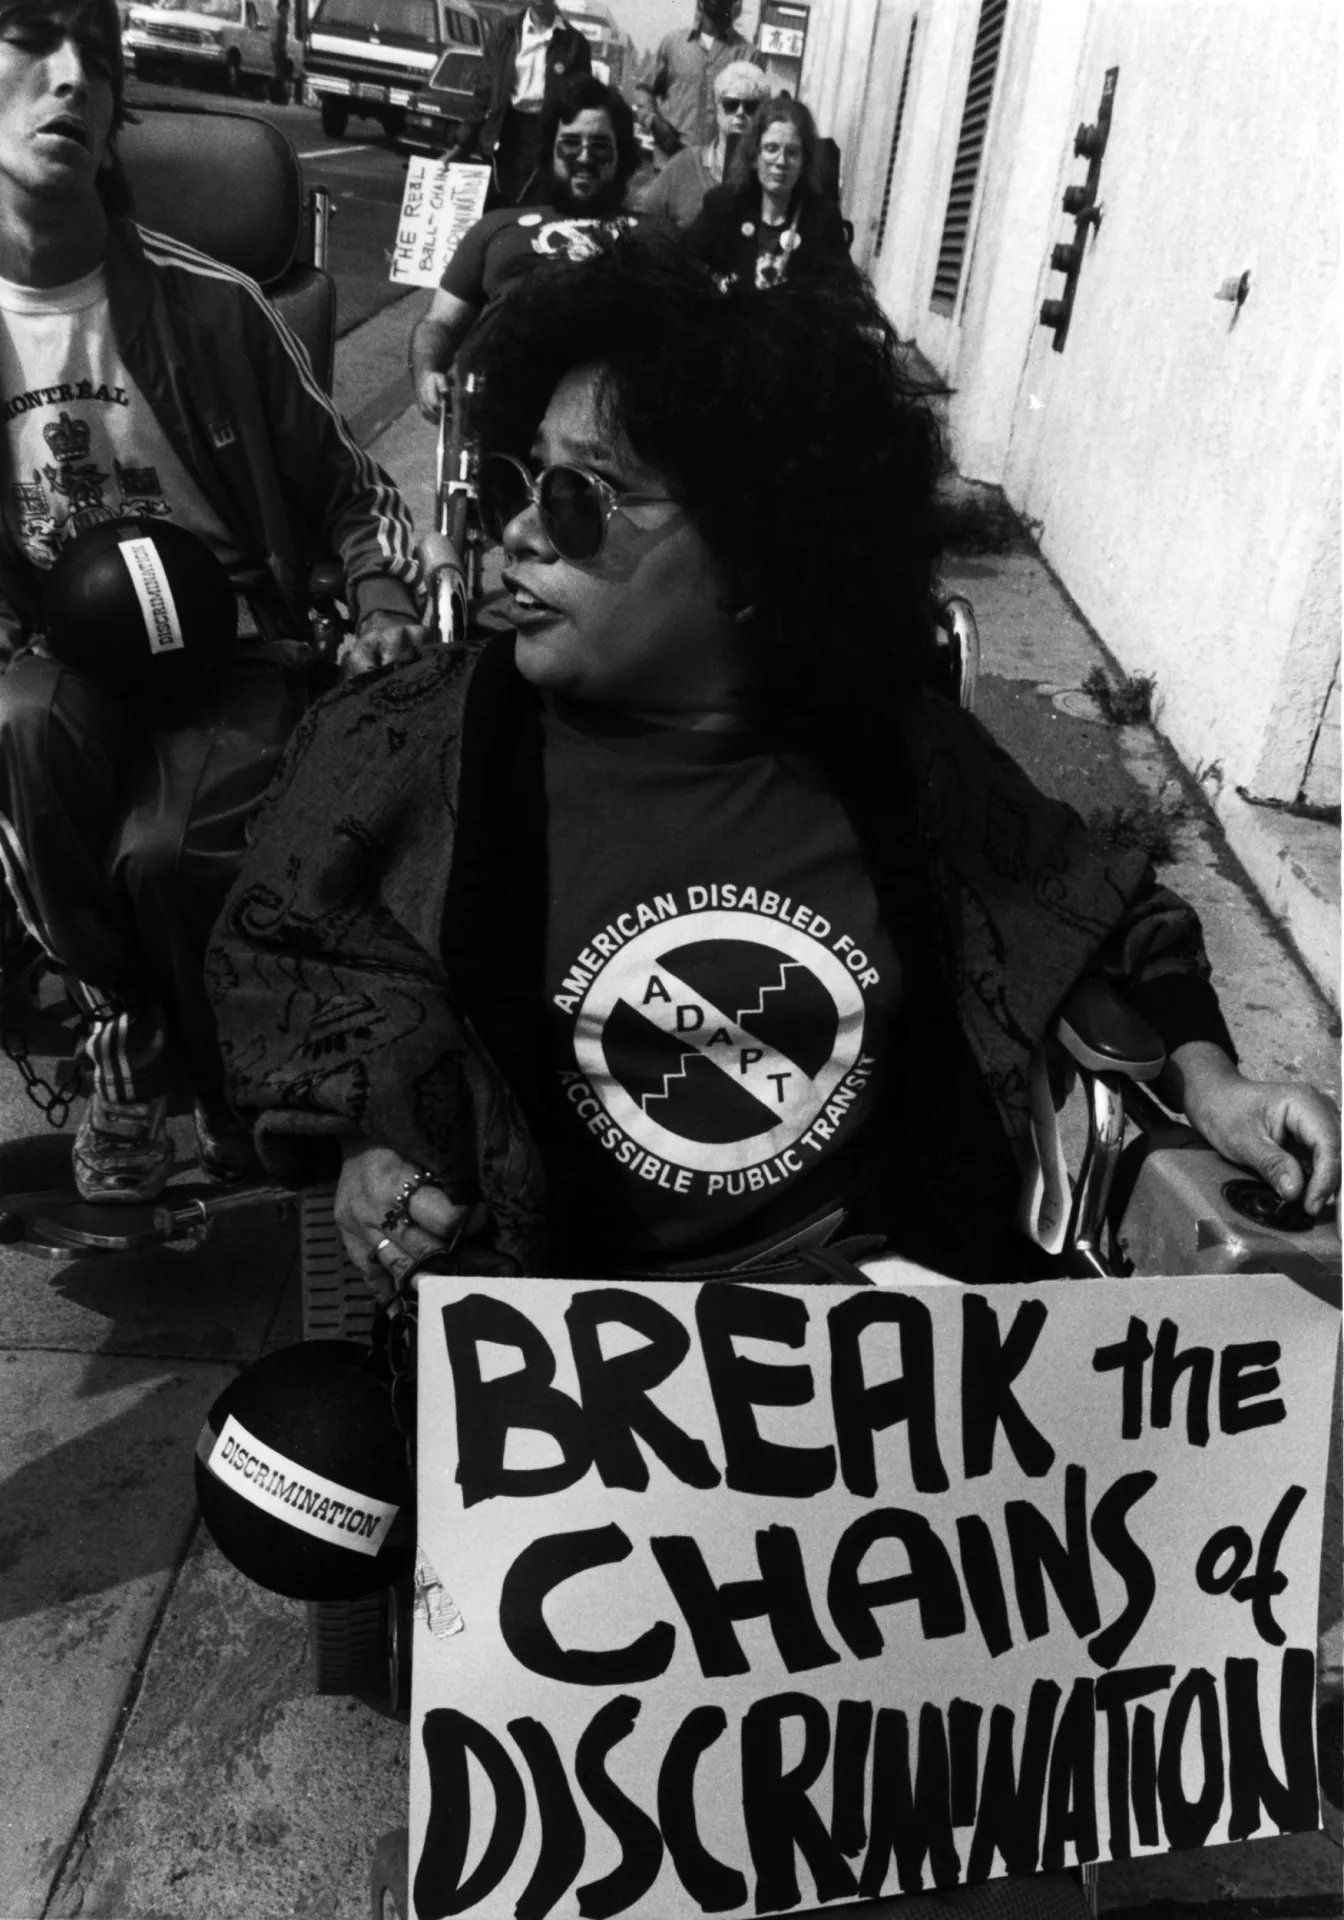 Break the Chains of Discrimination protest sign carried by a protestor, in Los Angeles when Randy Horton, Lillibeth Navarro and Nancy Becker Kennedy were arrested at a protest decrying the budget cuts.